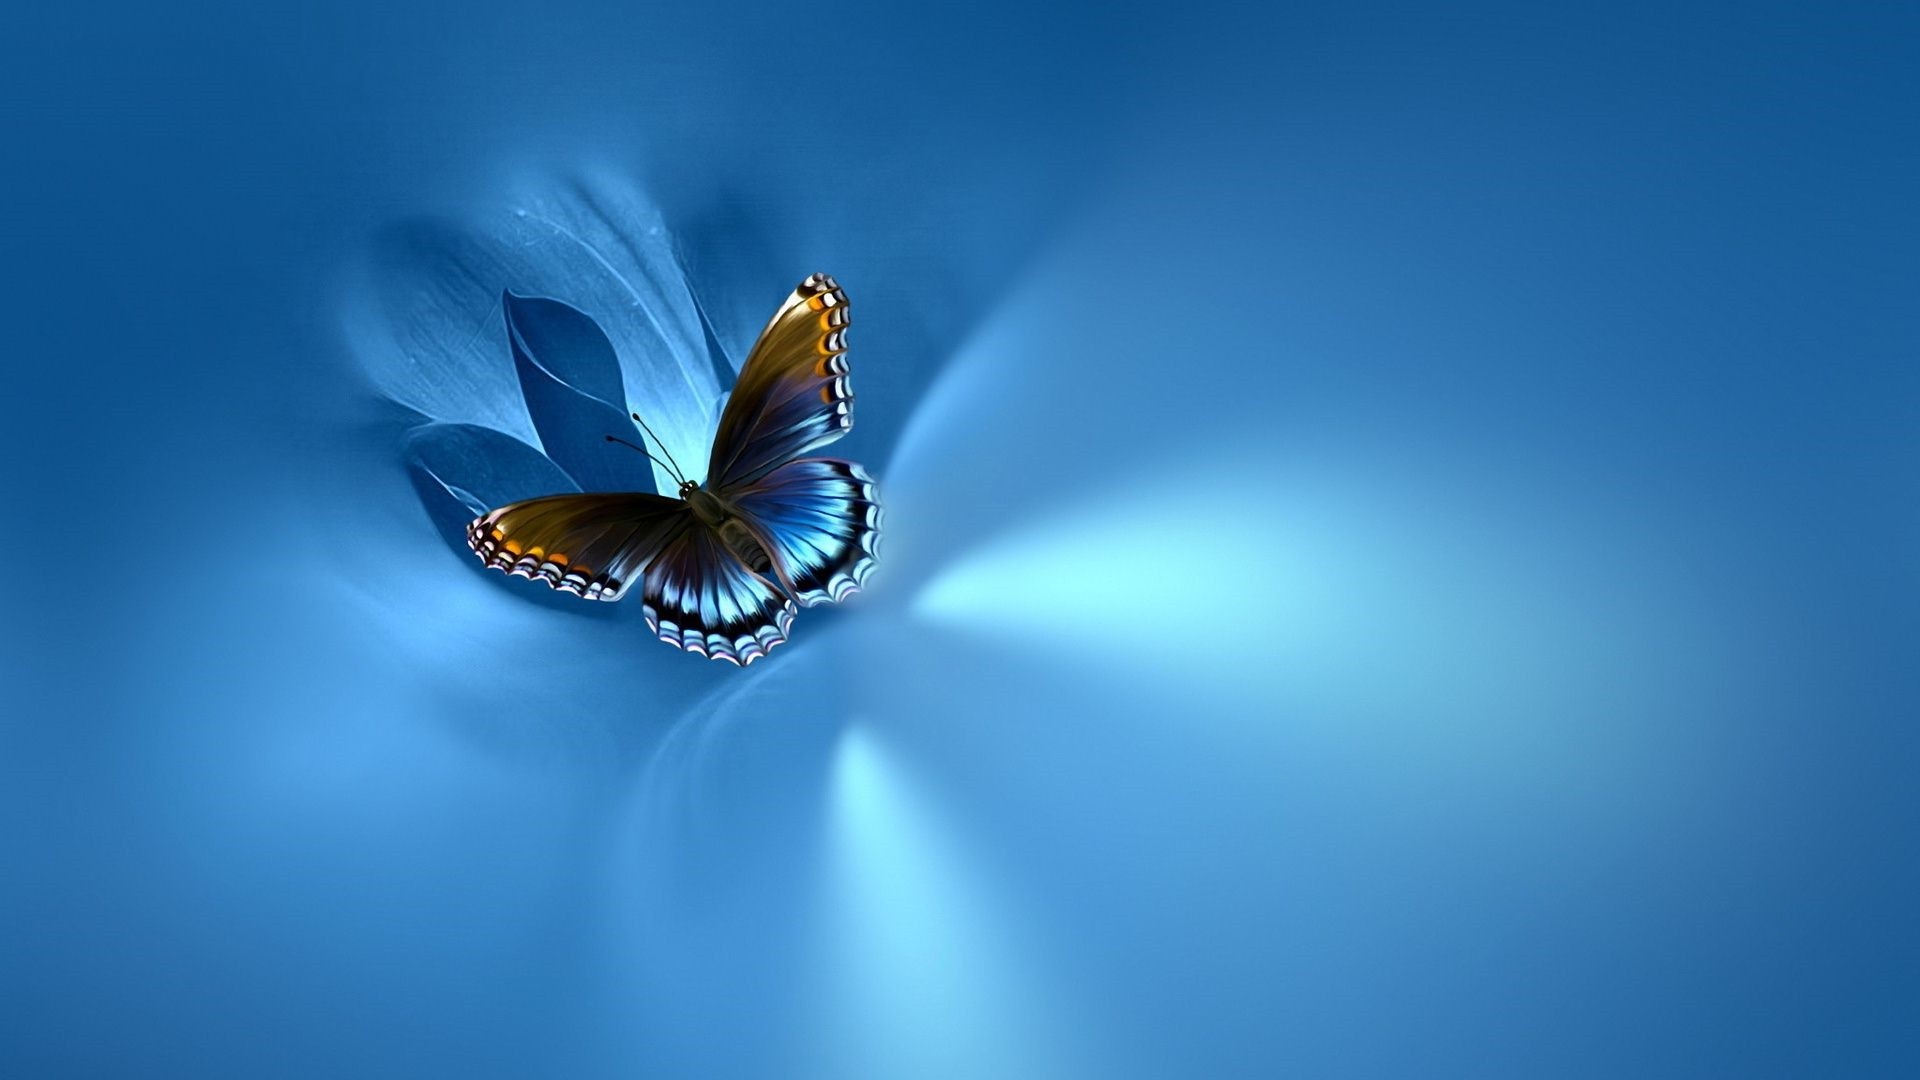 Blue Butterfly Image